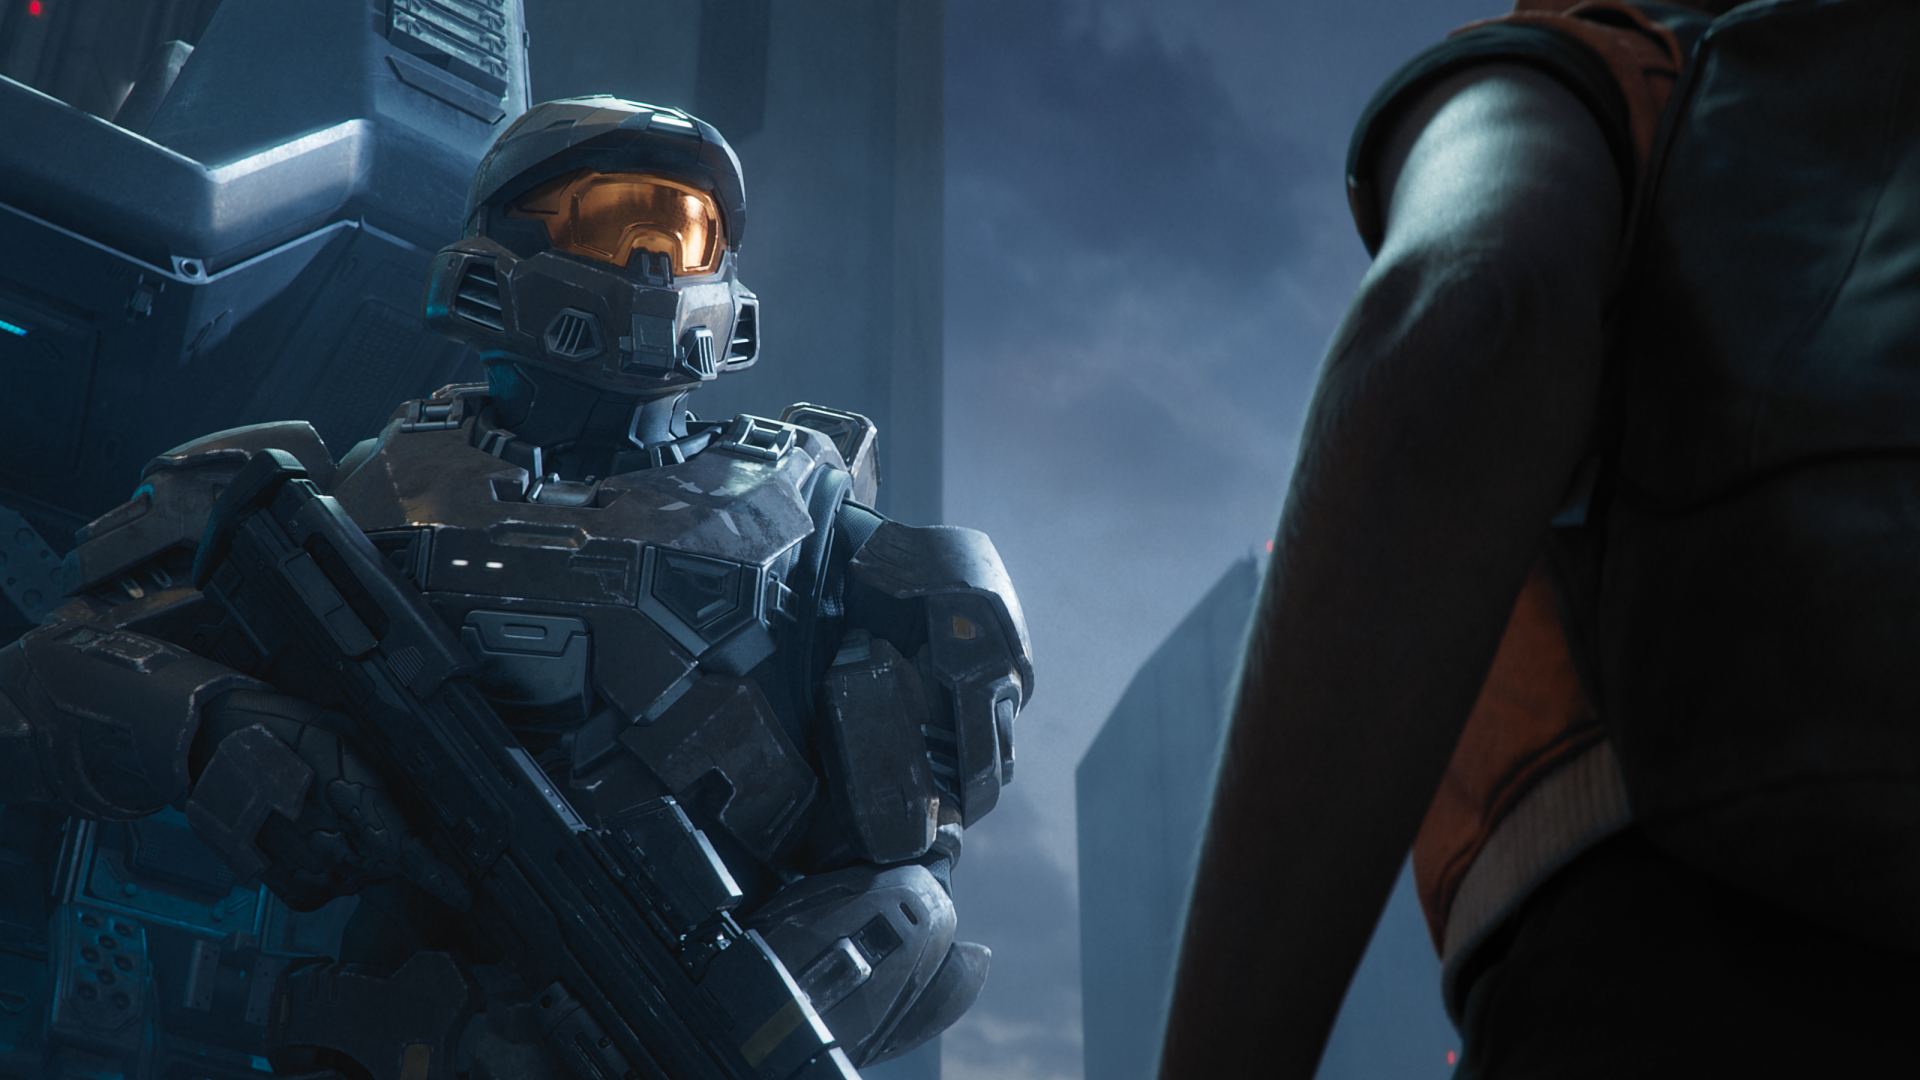 Halo: Infinite is launching next fall as new director reintroduces game